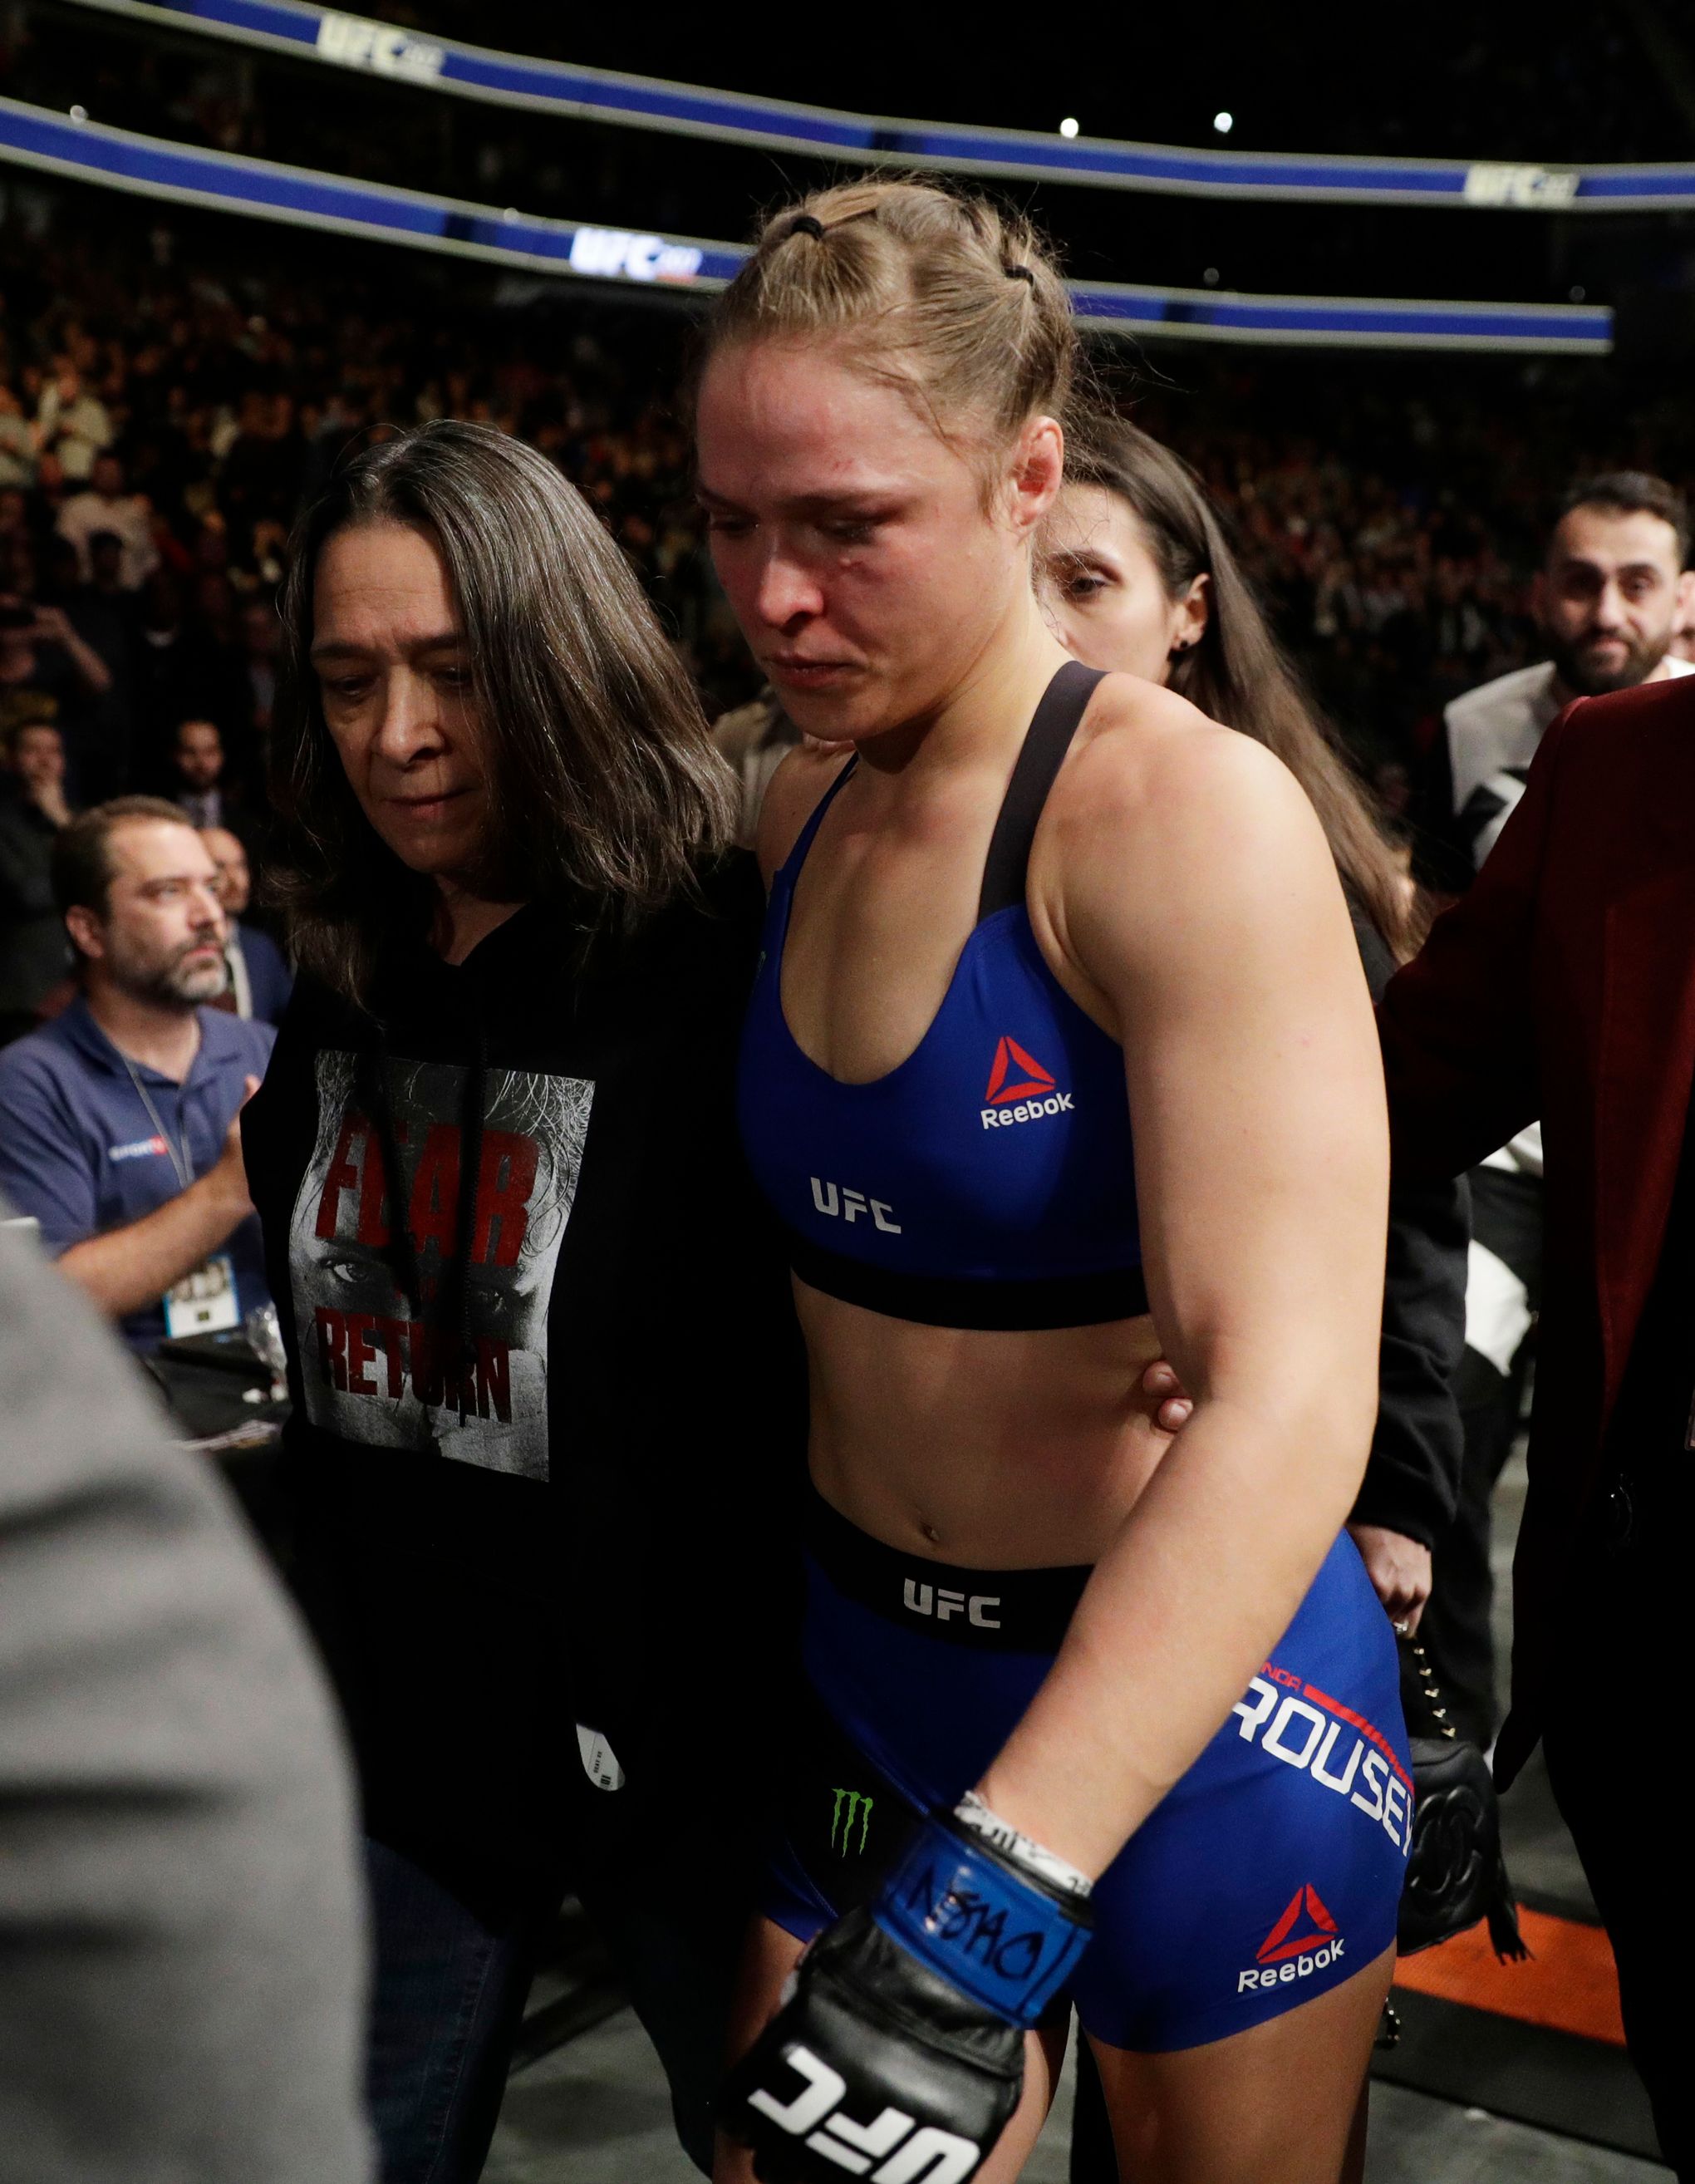 Retire or fight back? UFC stars offer advice to Ronda Rousey